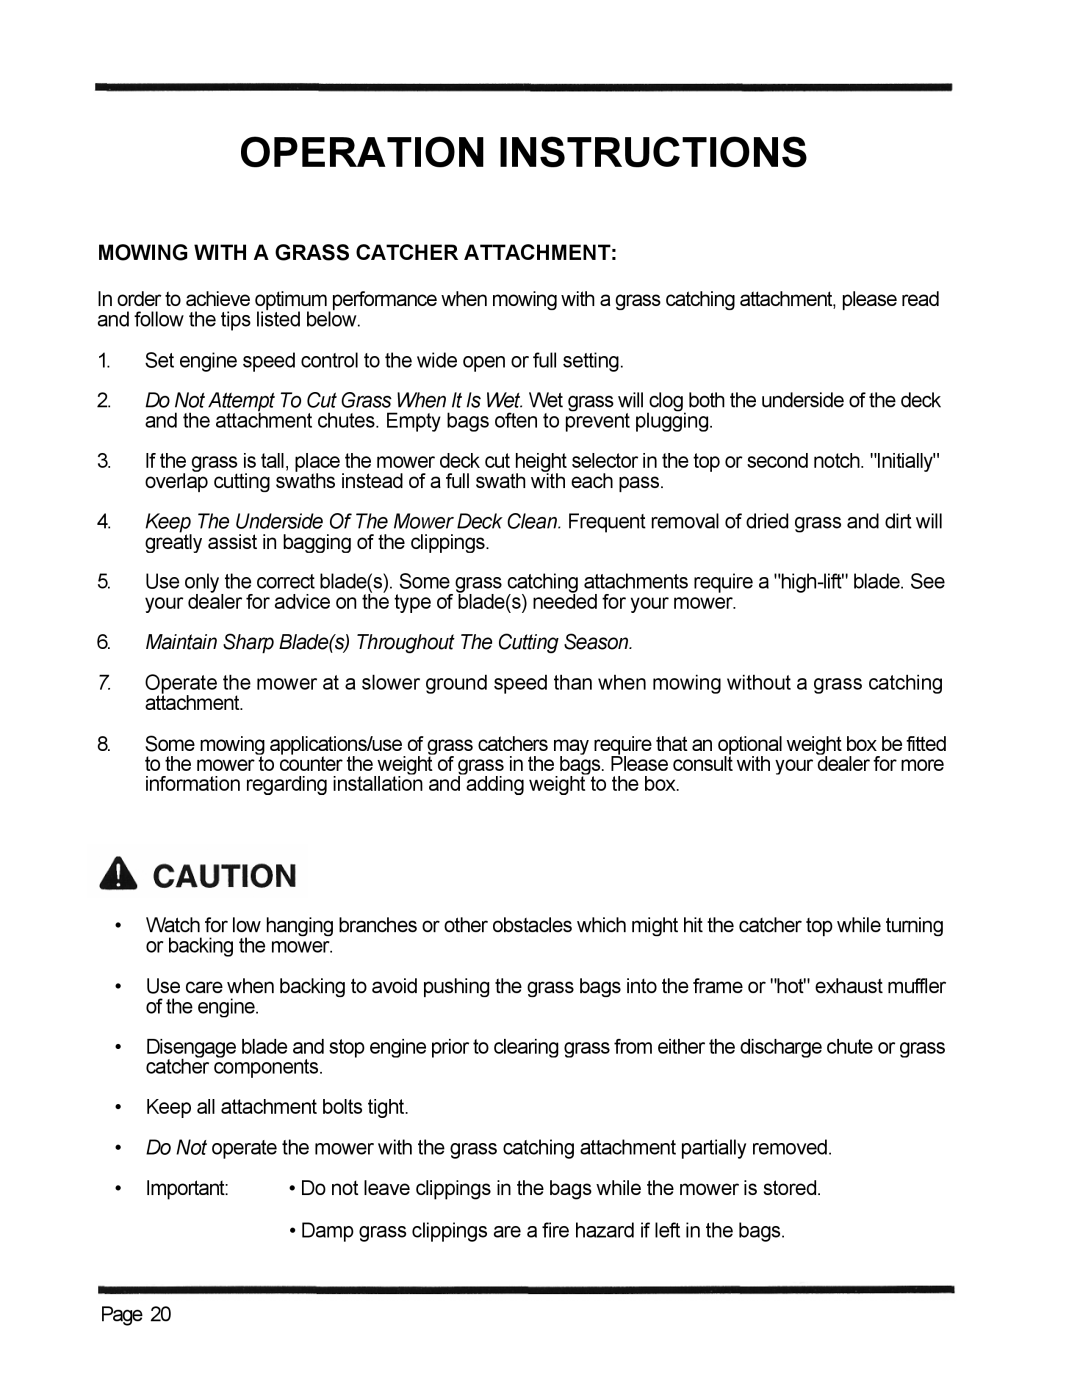 Dixon 3000 Series manual Operation Instructions, Mowing With A Grass Catcher Attachment 